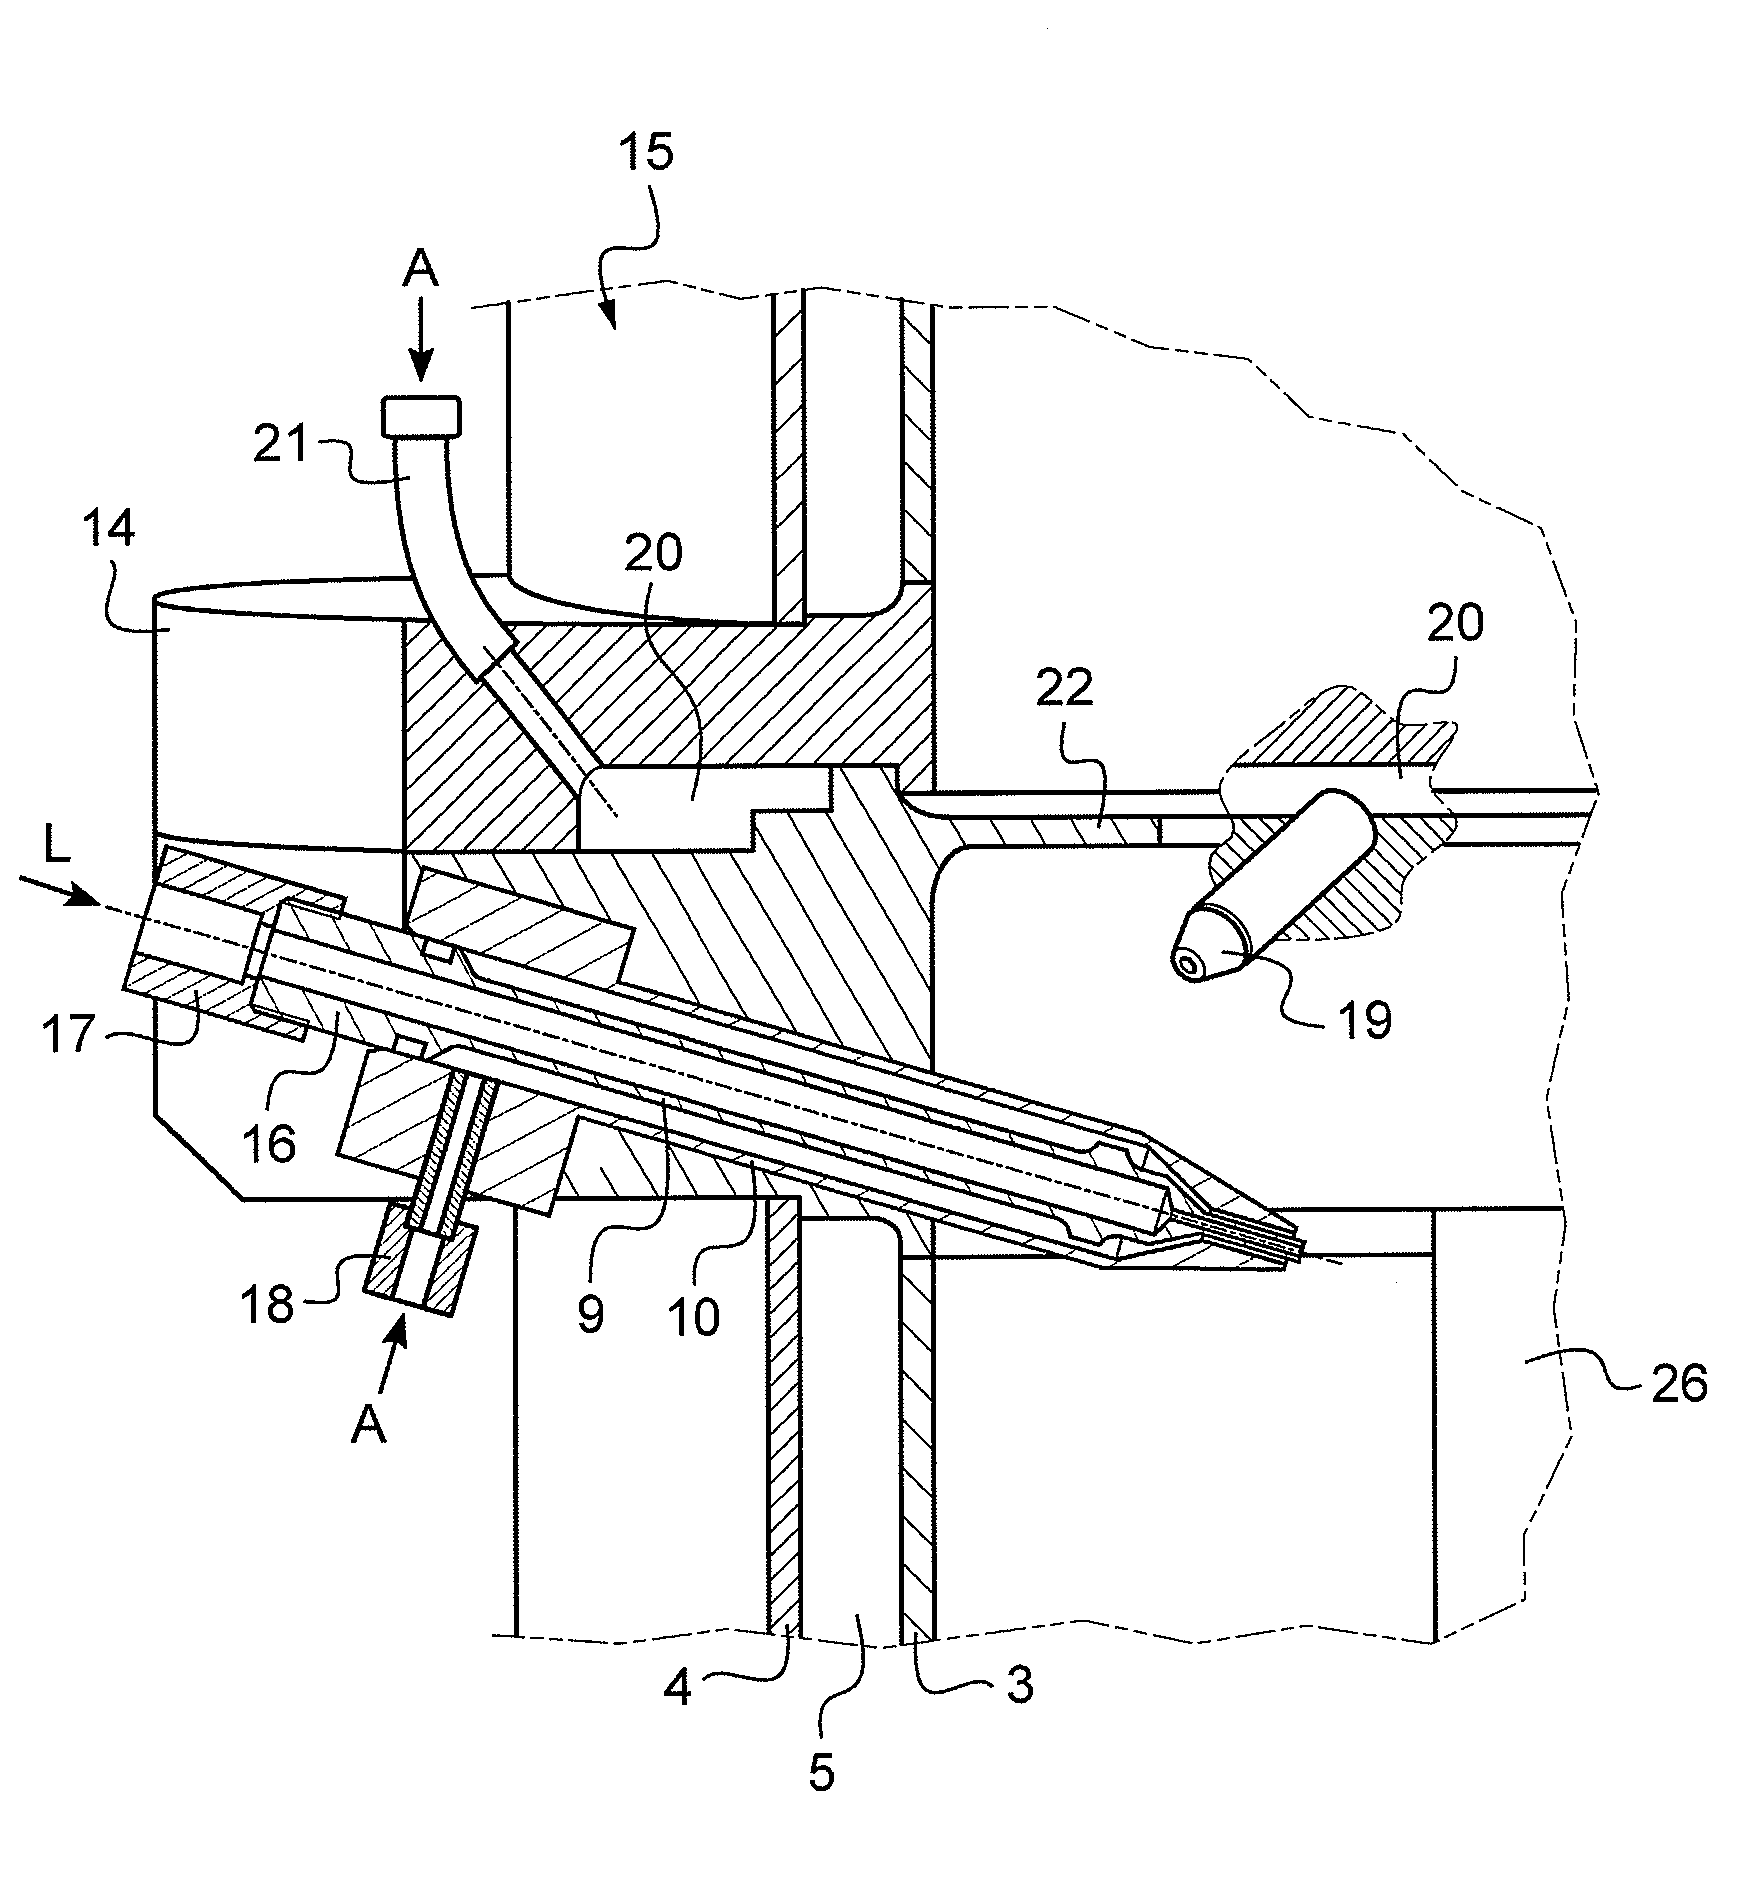 Device for evaporating a treatment liquid